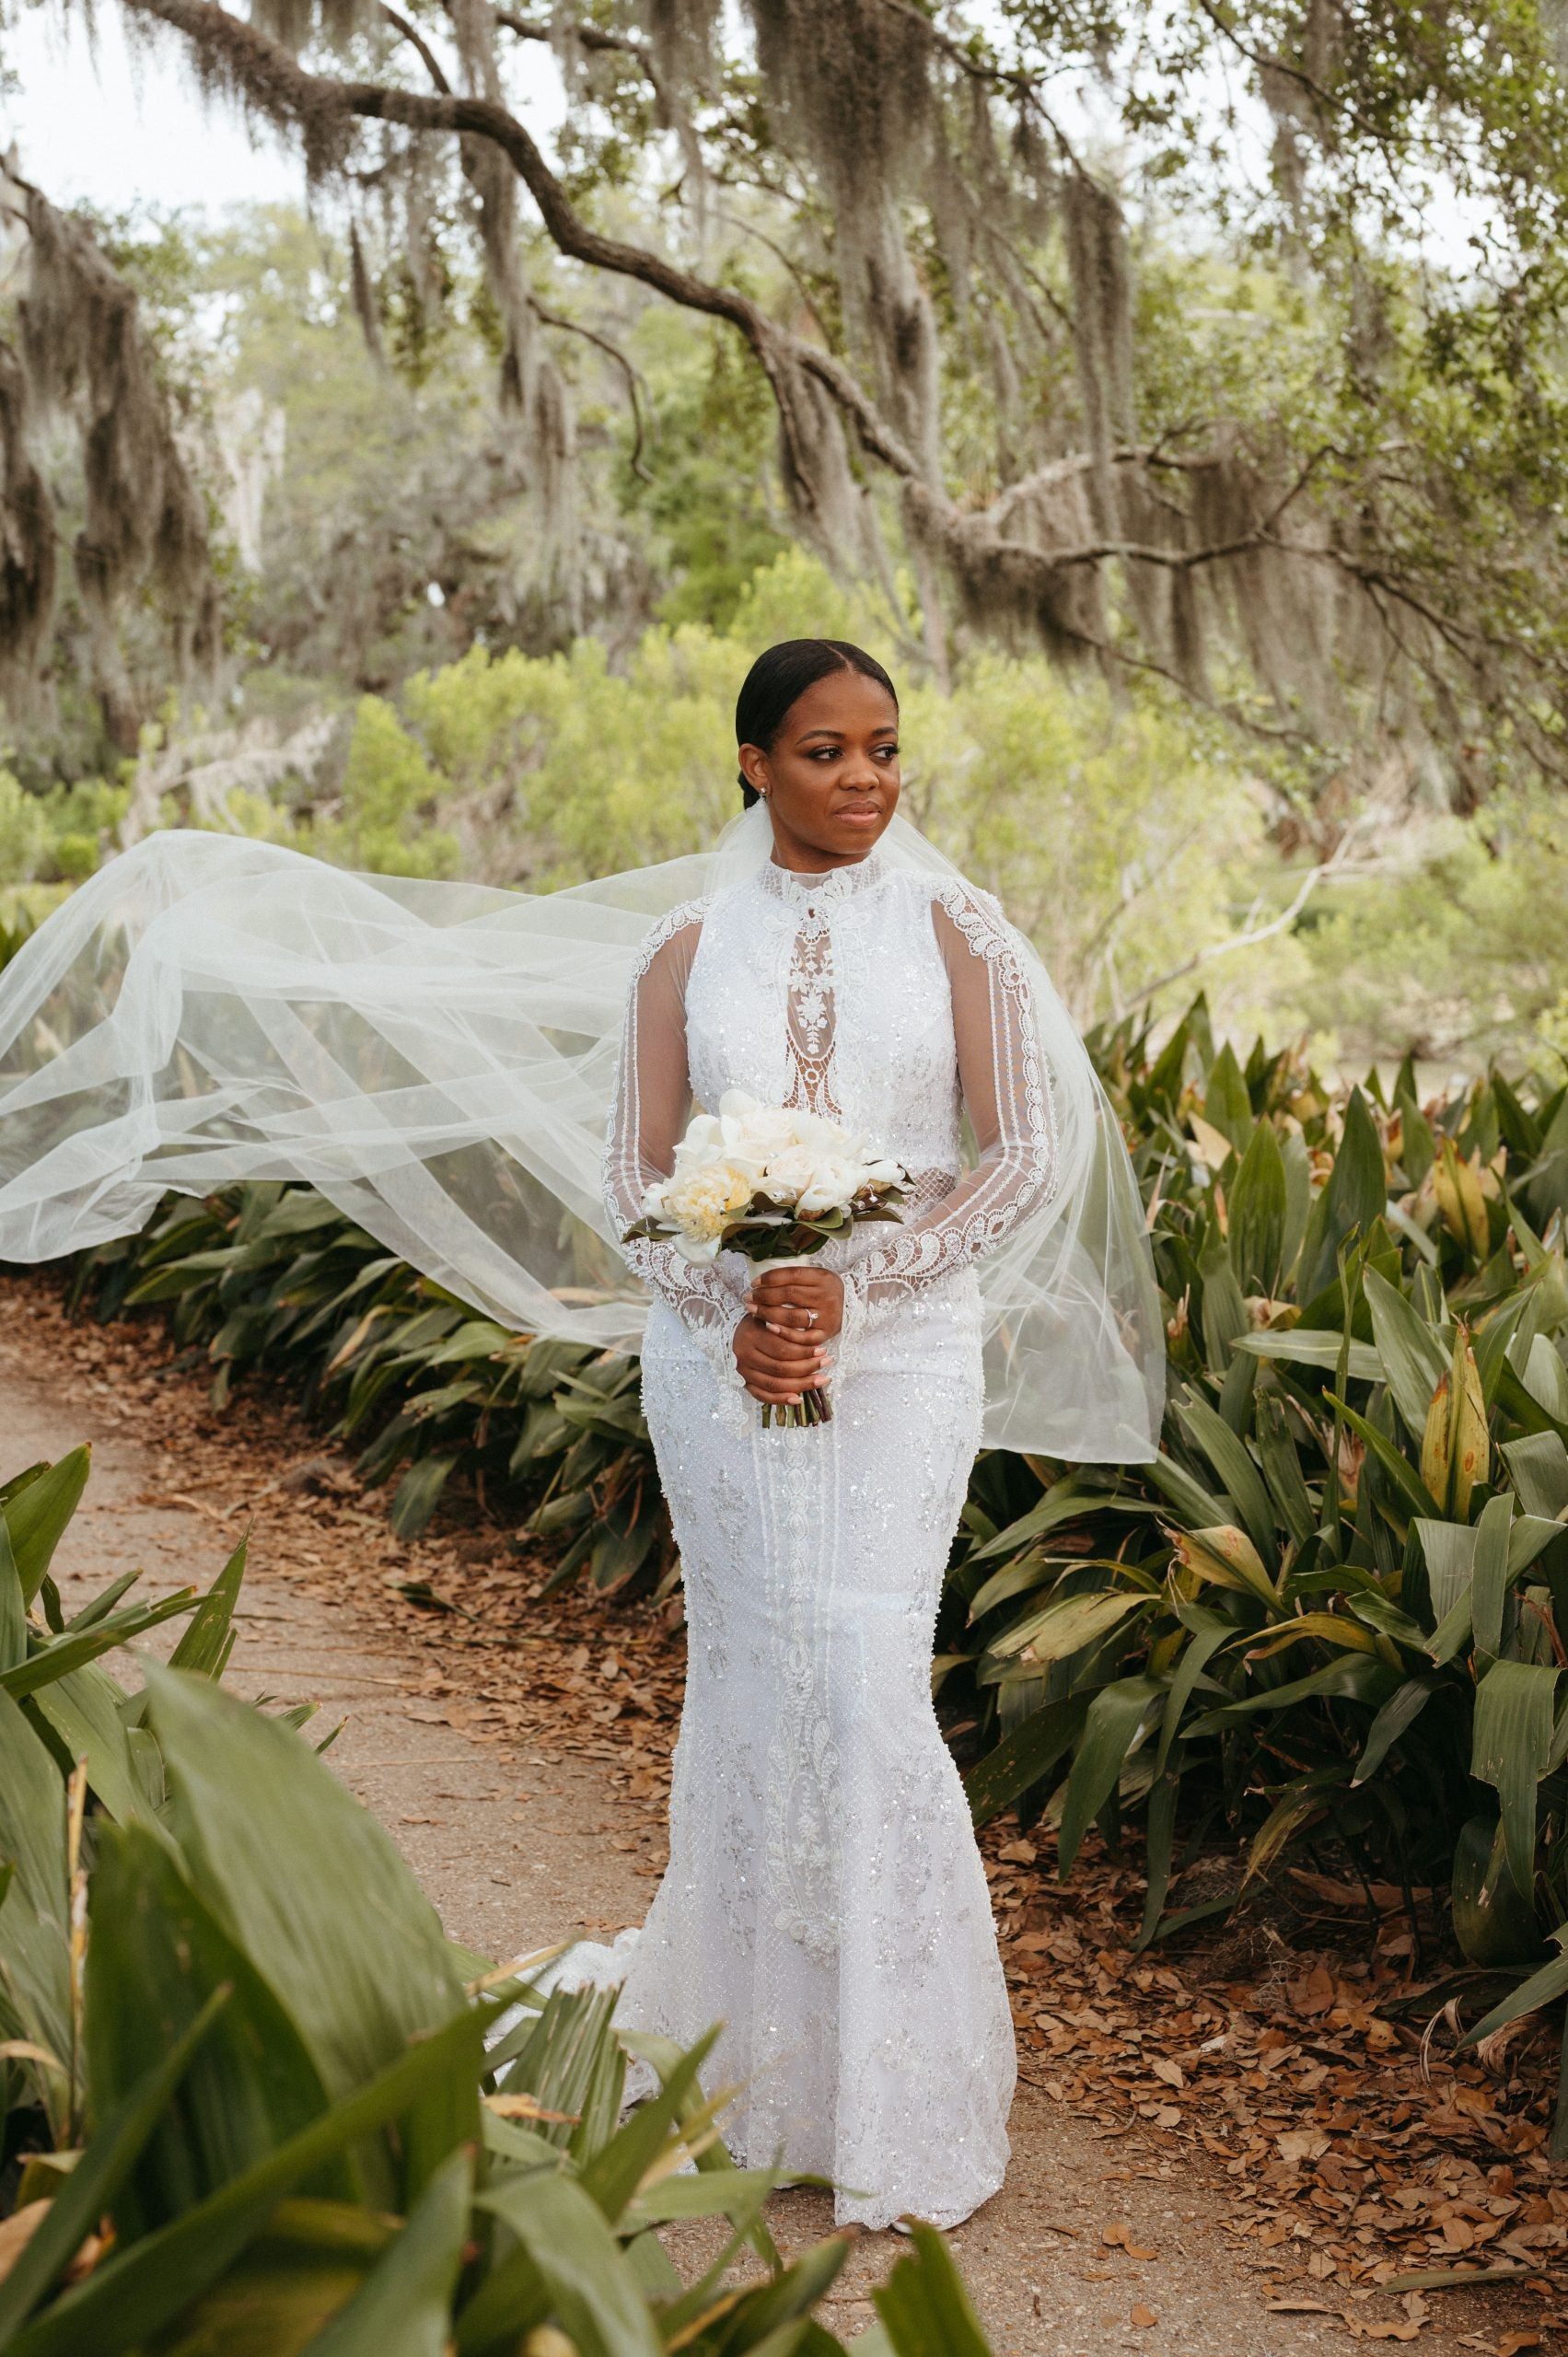 Heather And Drew's Nuptials Mixed New Orleans Charm With Brooklyn Swag